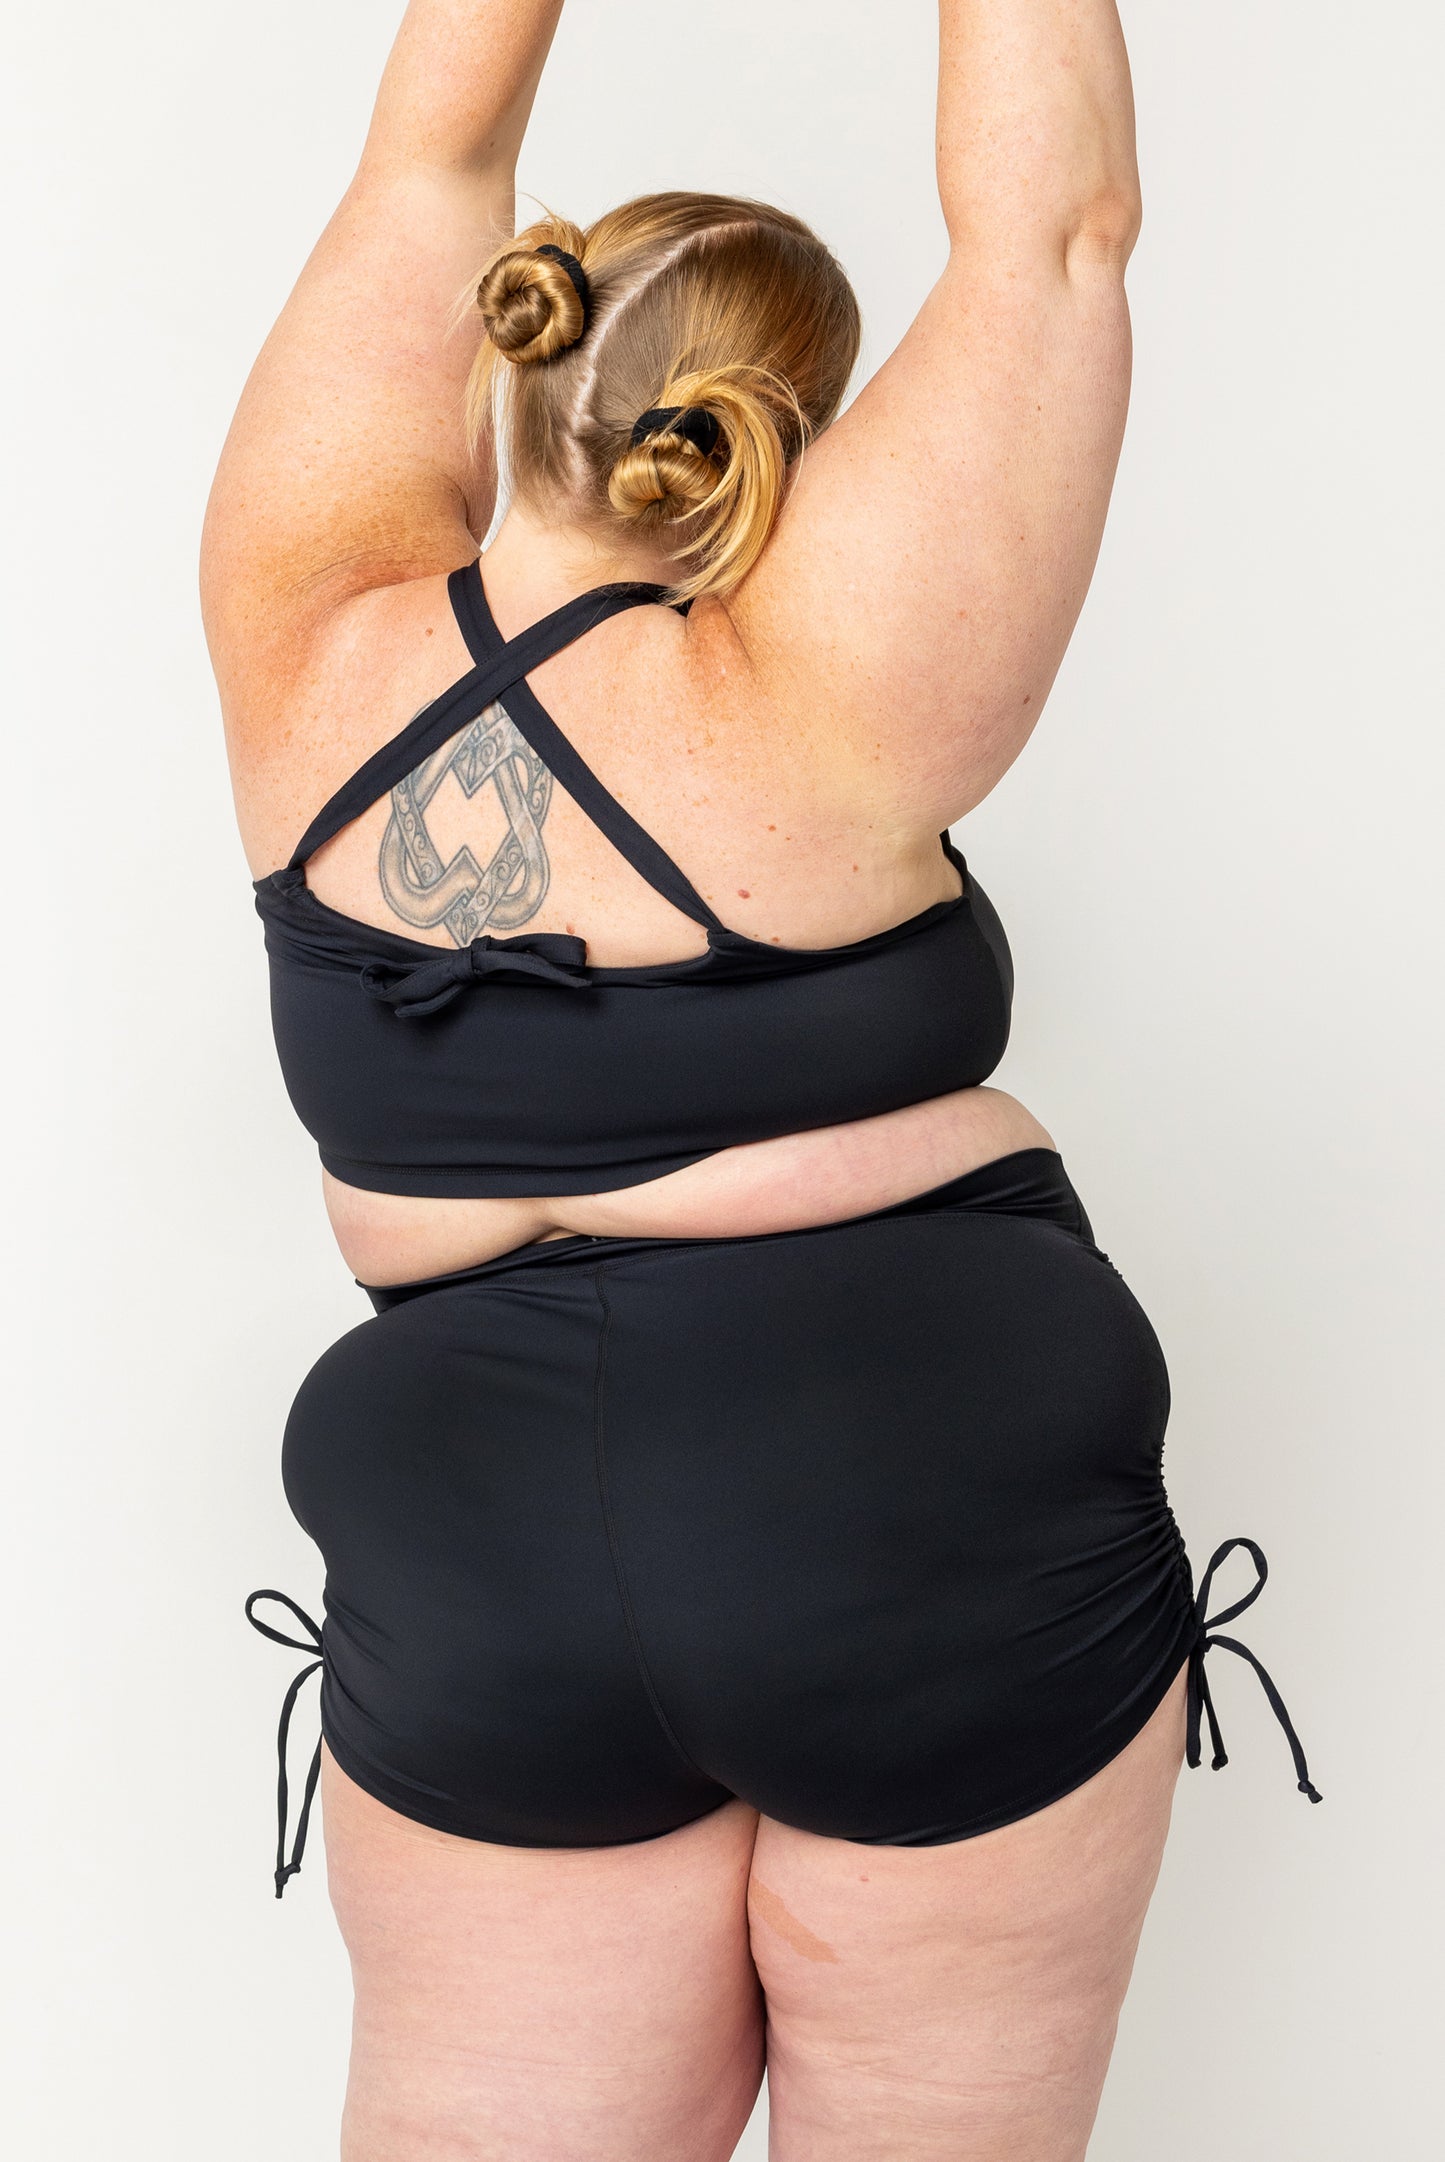 Back view of Plus size model wearing swim booty shorts with adjustable sides cinched up in size 4X.